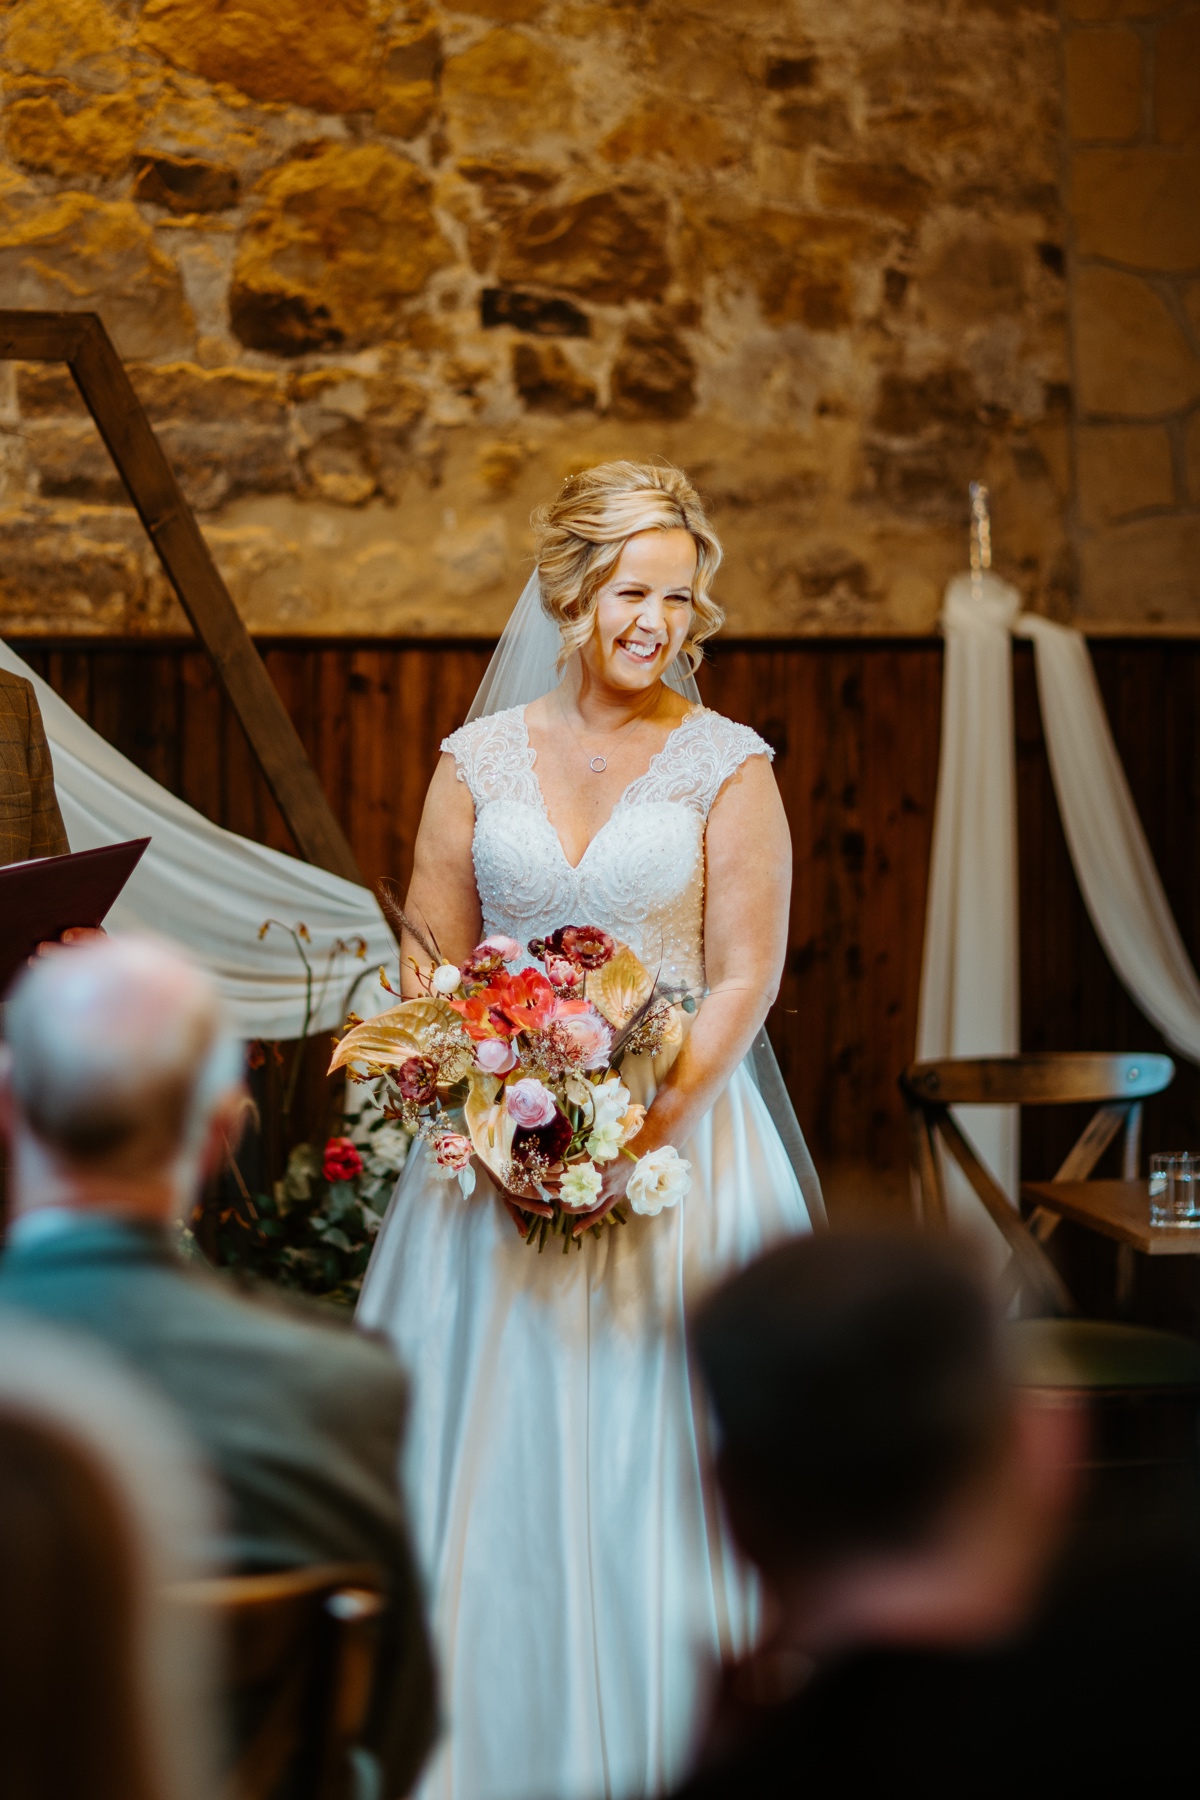 smiling bride with blonde hair wearing white lace dress and holding floral bouquet during ceremony scottish humanist wedding